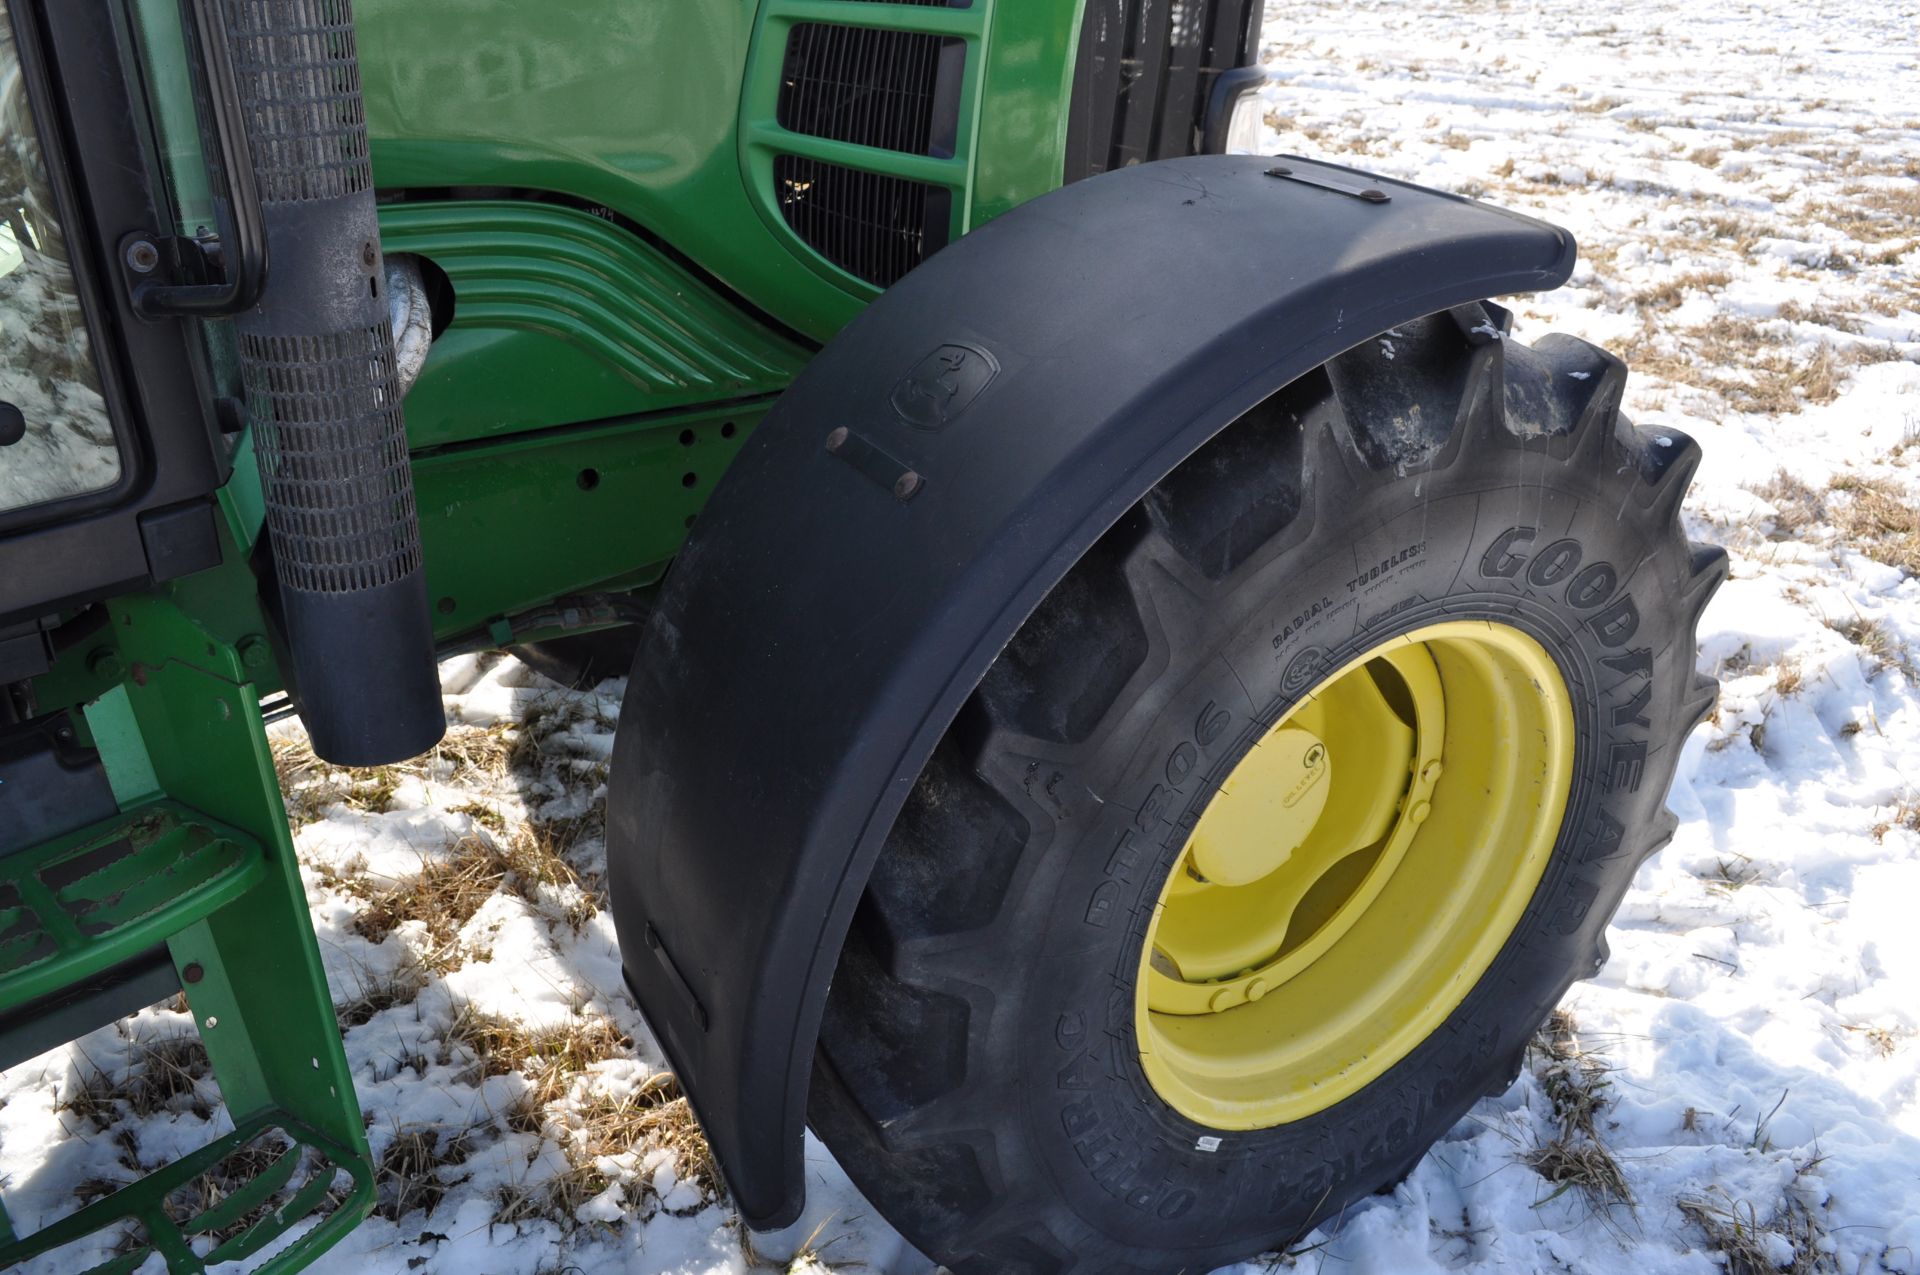 John Deere 6430 tractor, MFWD, C/H/A, 6x4 trans, 460/85R38 rear, 420/85R24 front, front fenders, - Image 14 of 36